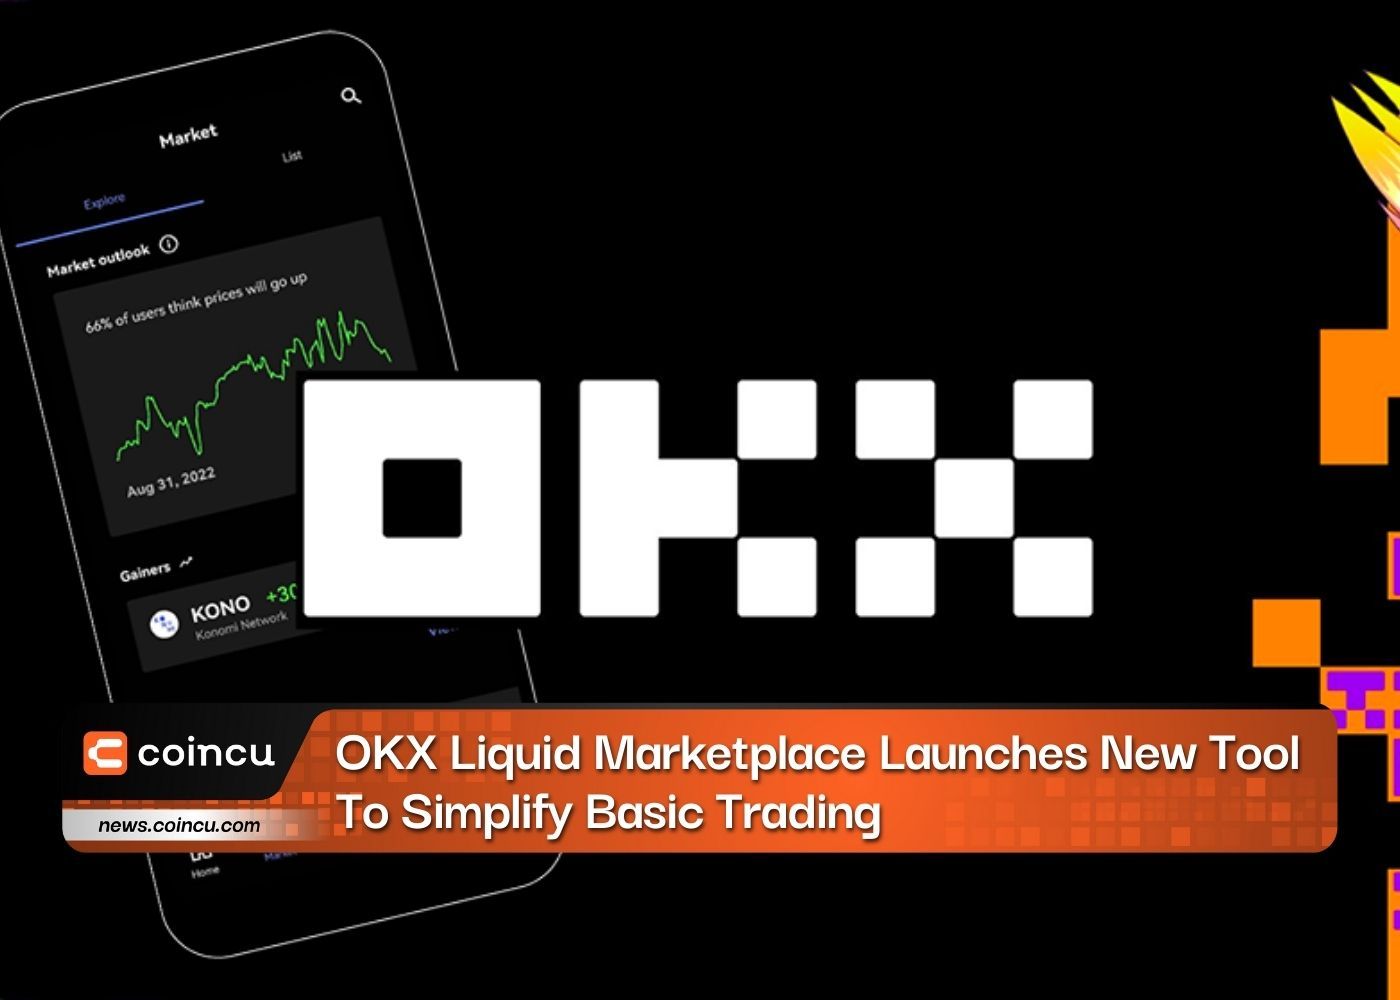 OKX Liquid Marketplace Launches New Tool To Simplify Basic Trading